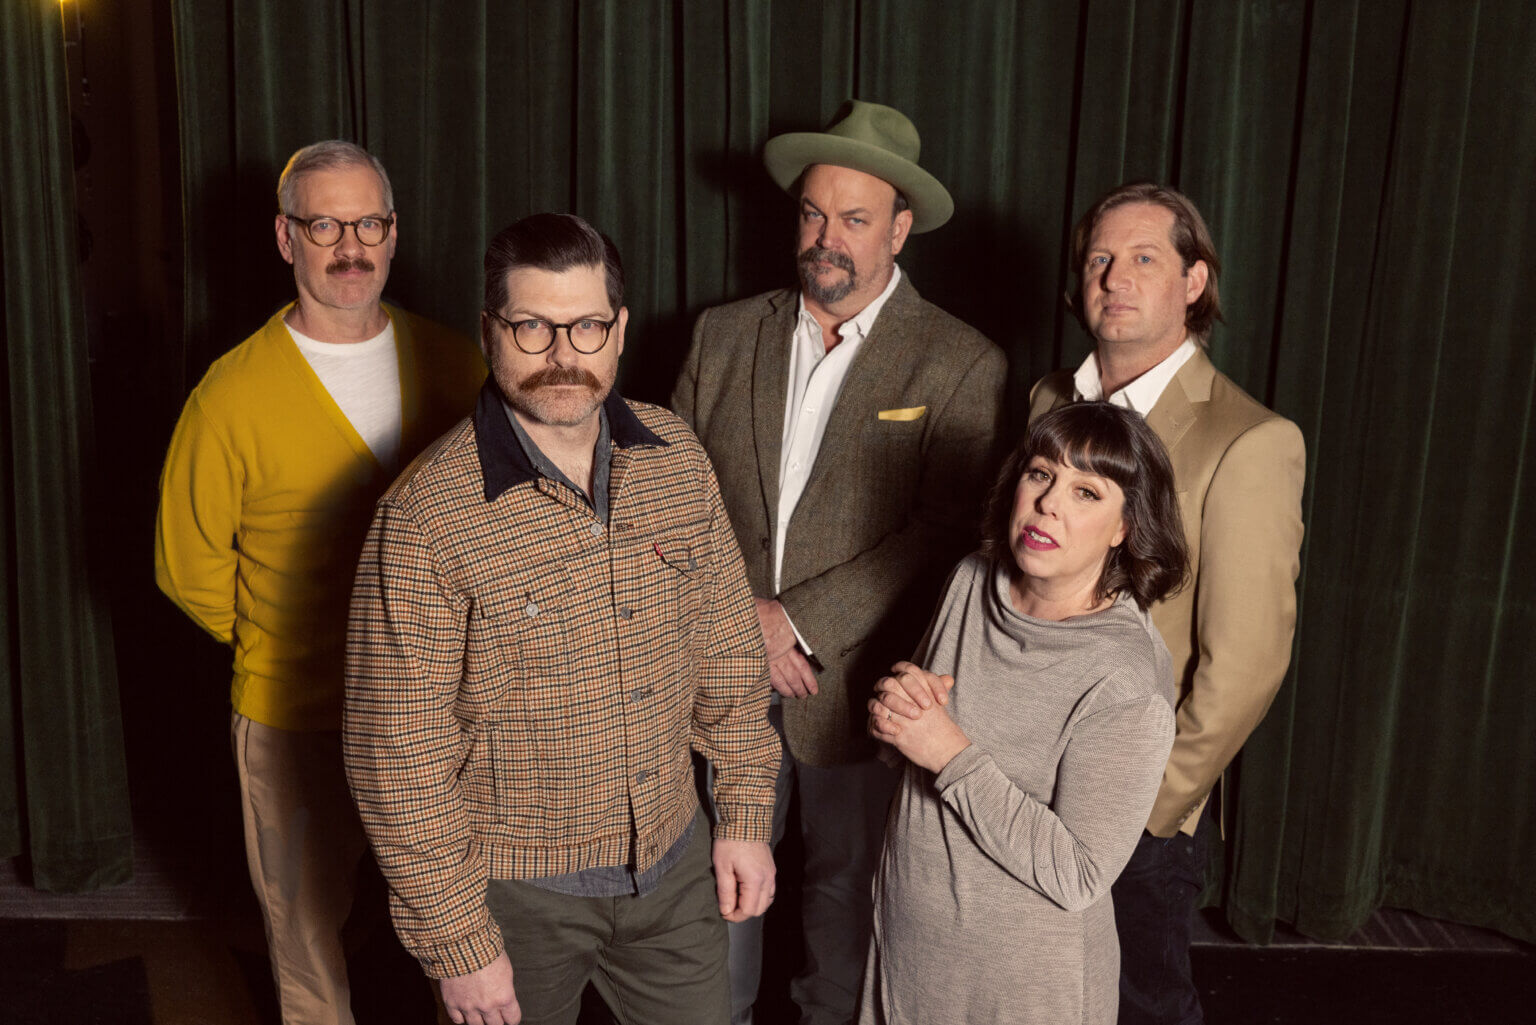 The Decemberists Debut "All I Want Is You"